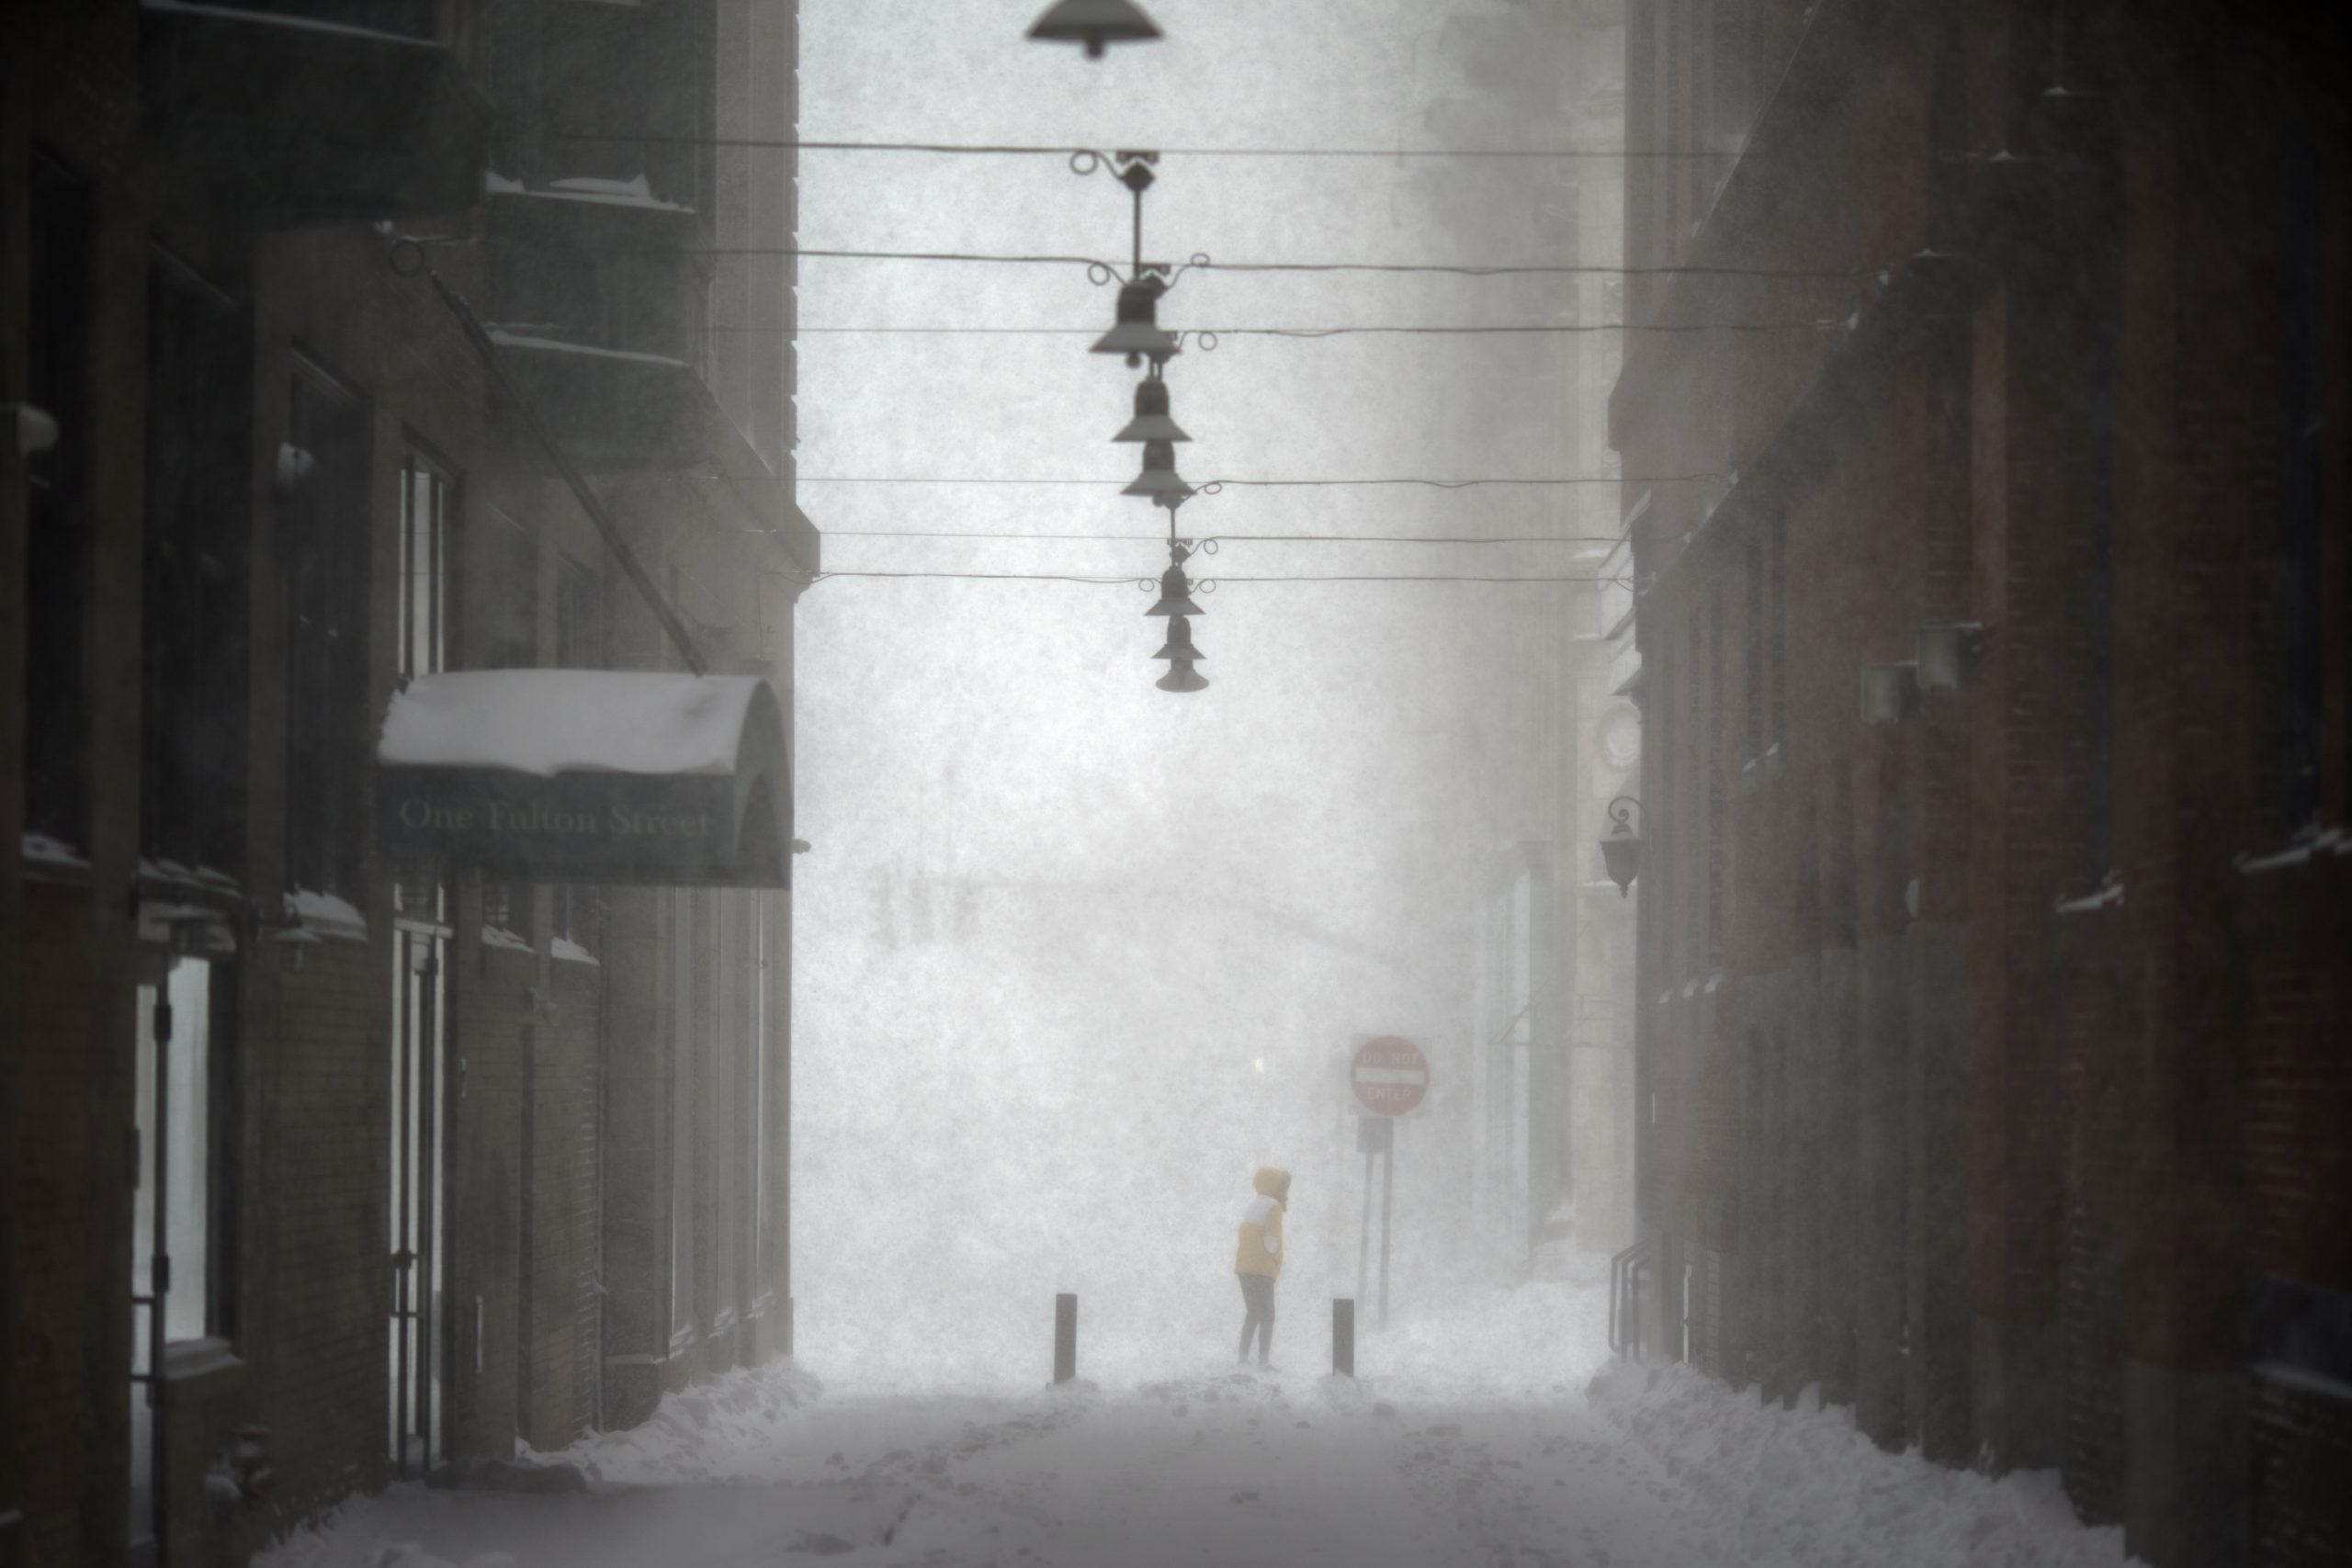 Winter storm lashes East Coast with deep snow, high winds